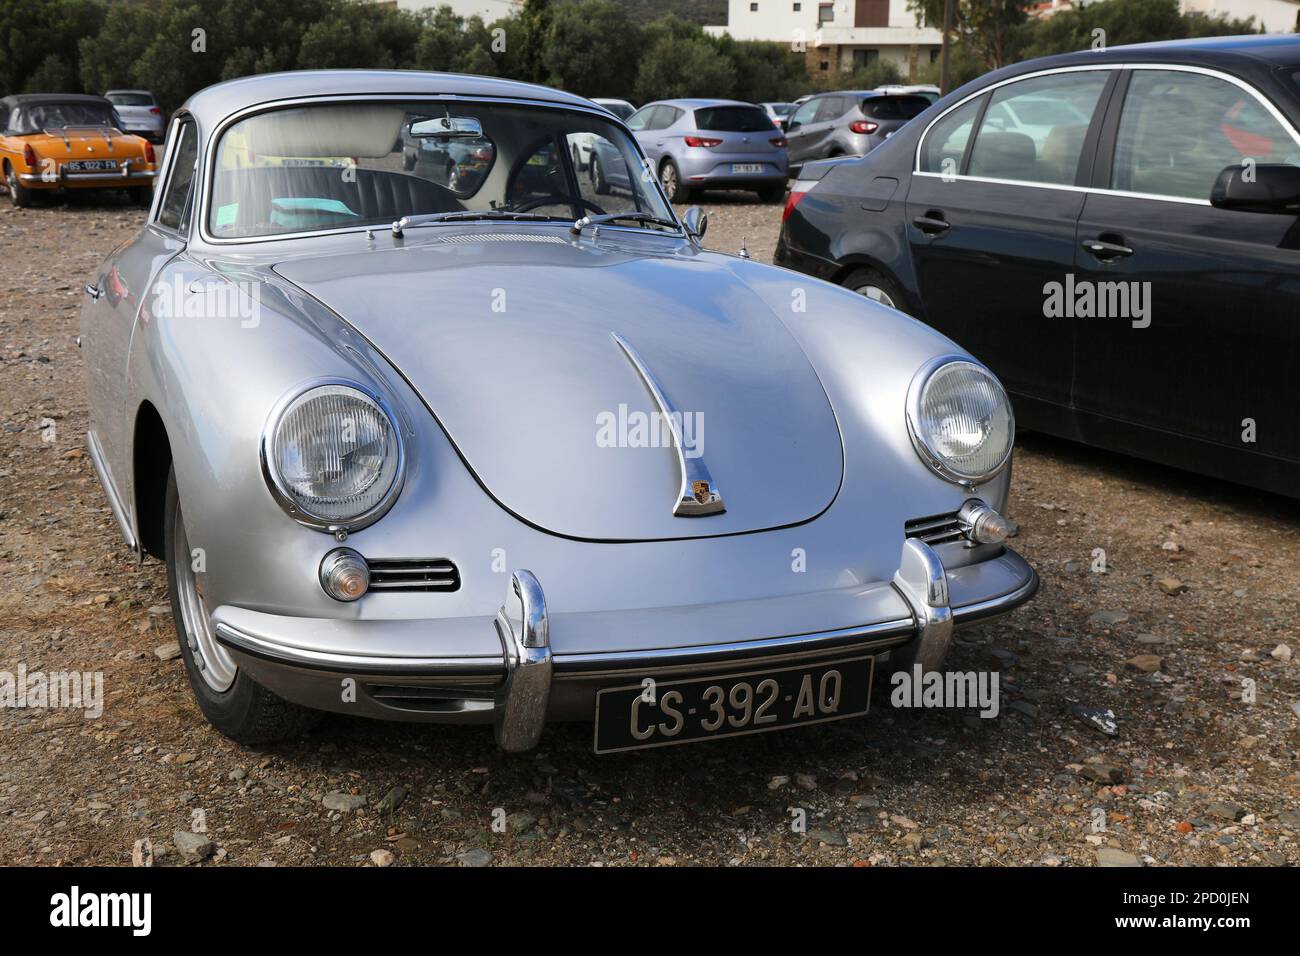 CADAQUES, SPAIN - OCTOBER 5, 2021: Porsche 356 oldtimer sports car parked in Cadaques, Spain. Stock Photo